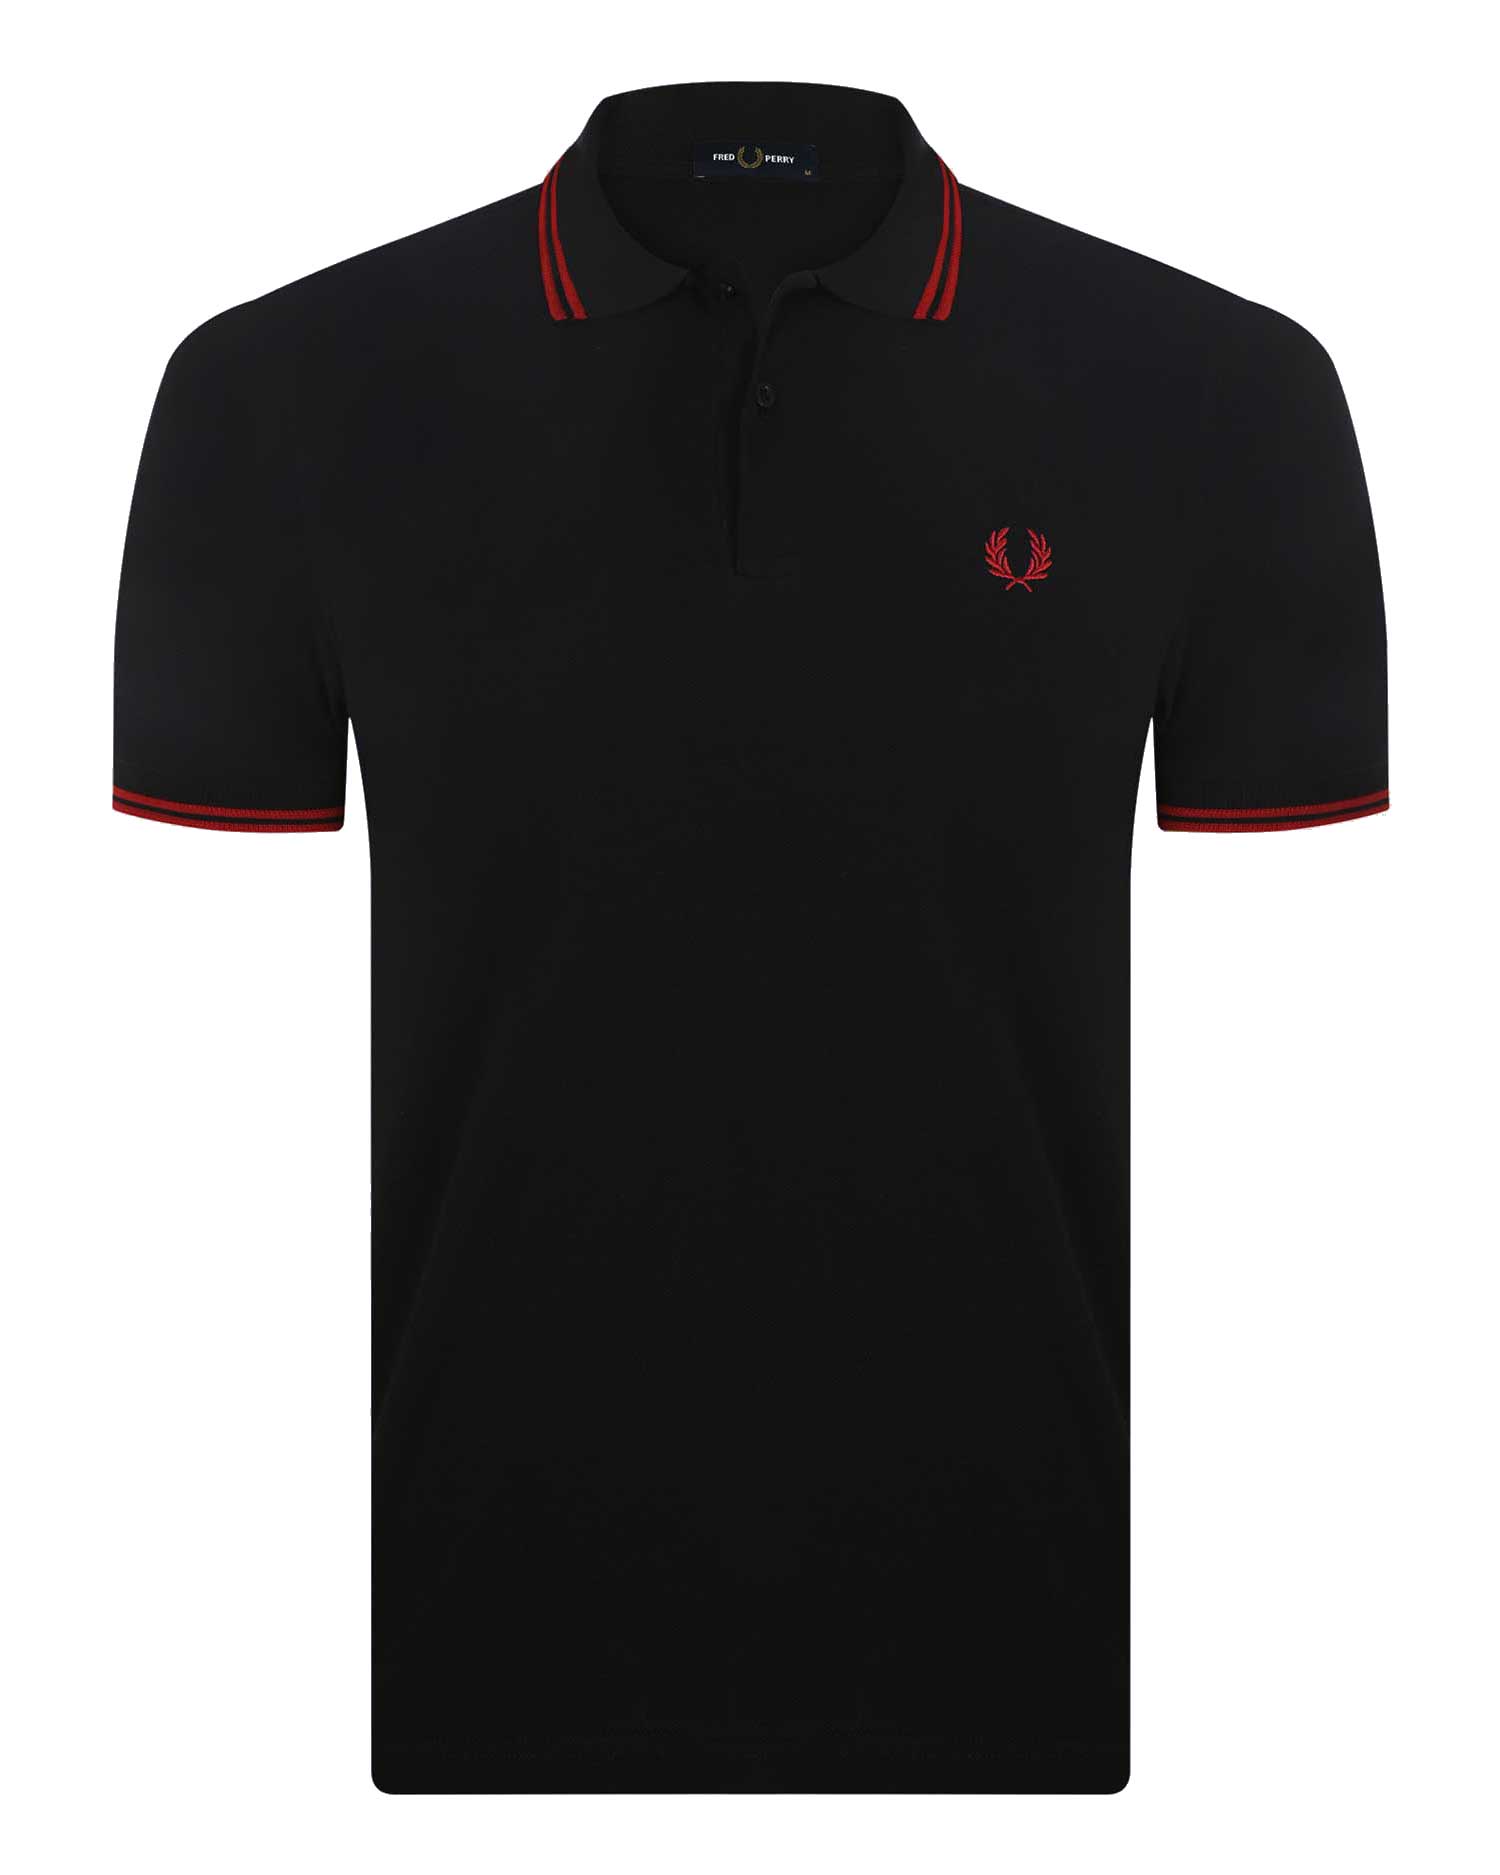 POLO FRED PERRY - NOIR/ROUGE